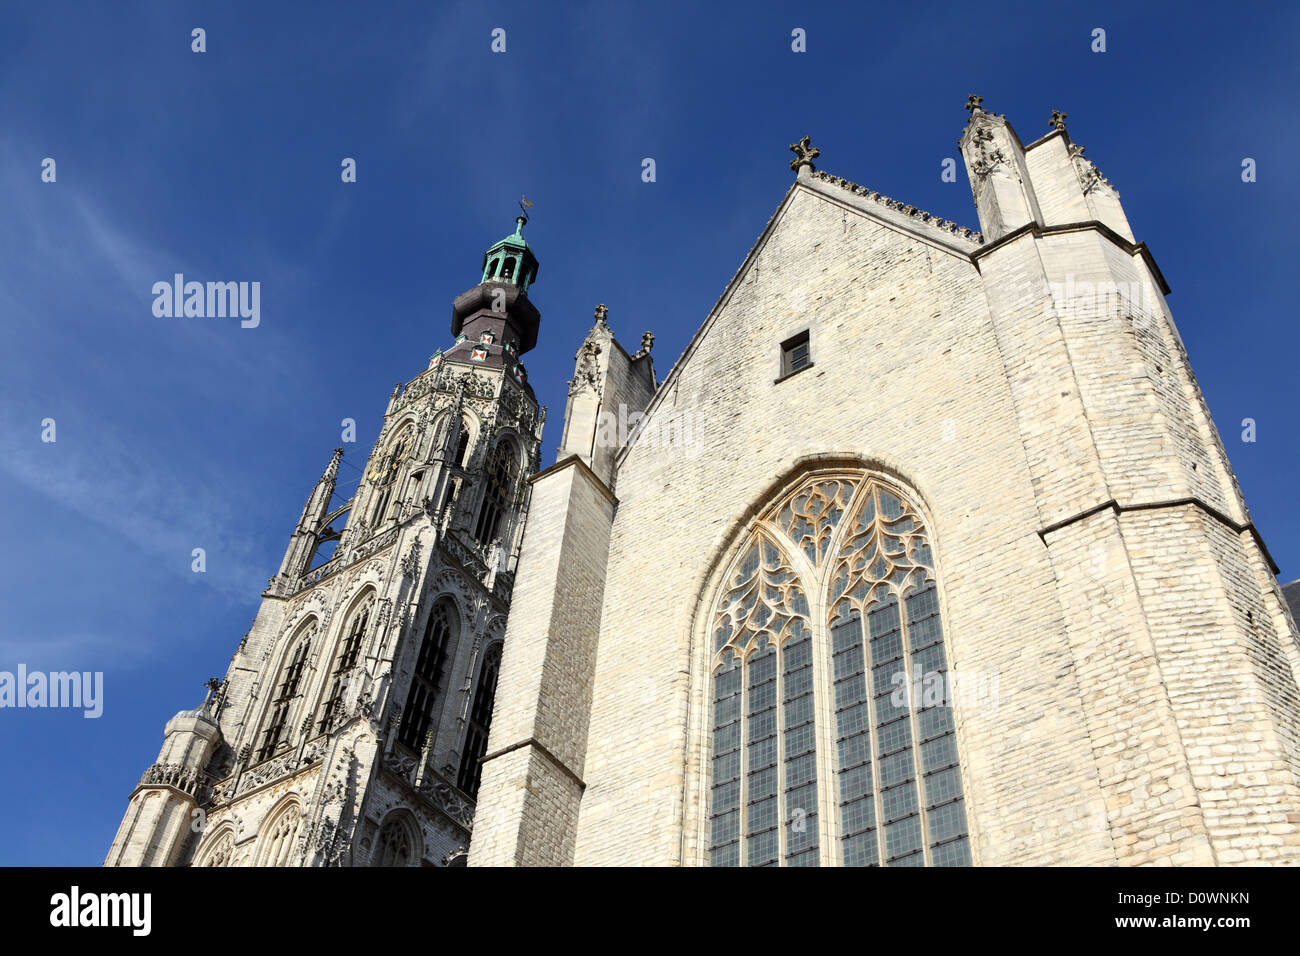 The Grote Kerk, also known as Onze Lieve Vrouwekerk (Church of Our Lady), in Breda, the Netherlands. Stock Photo